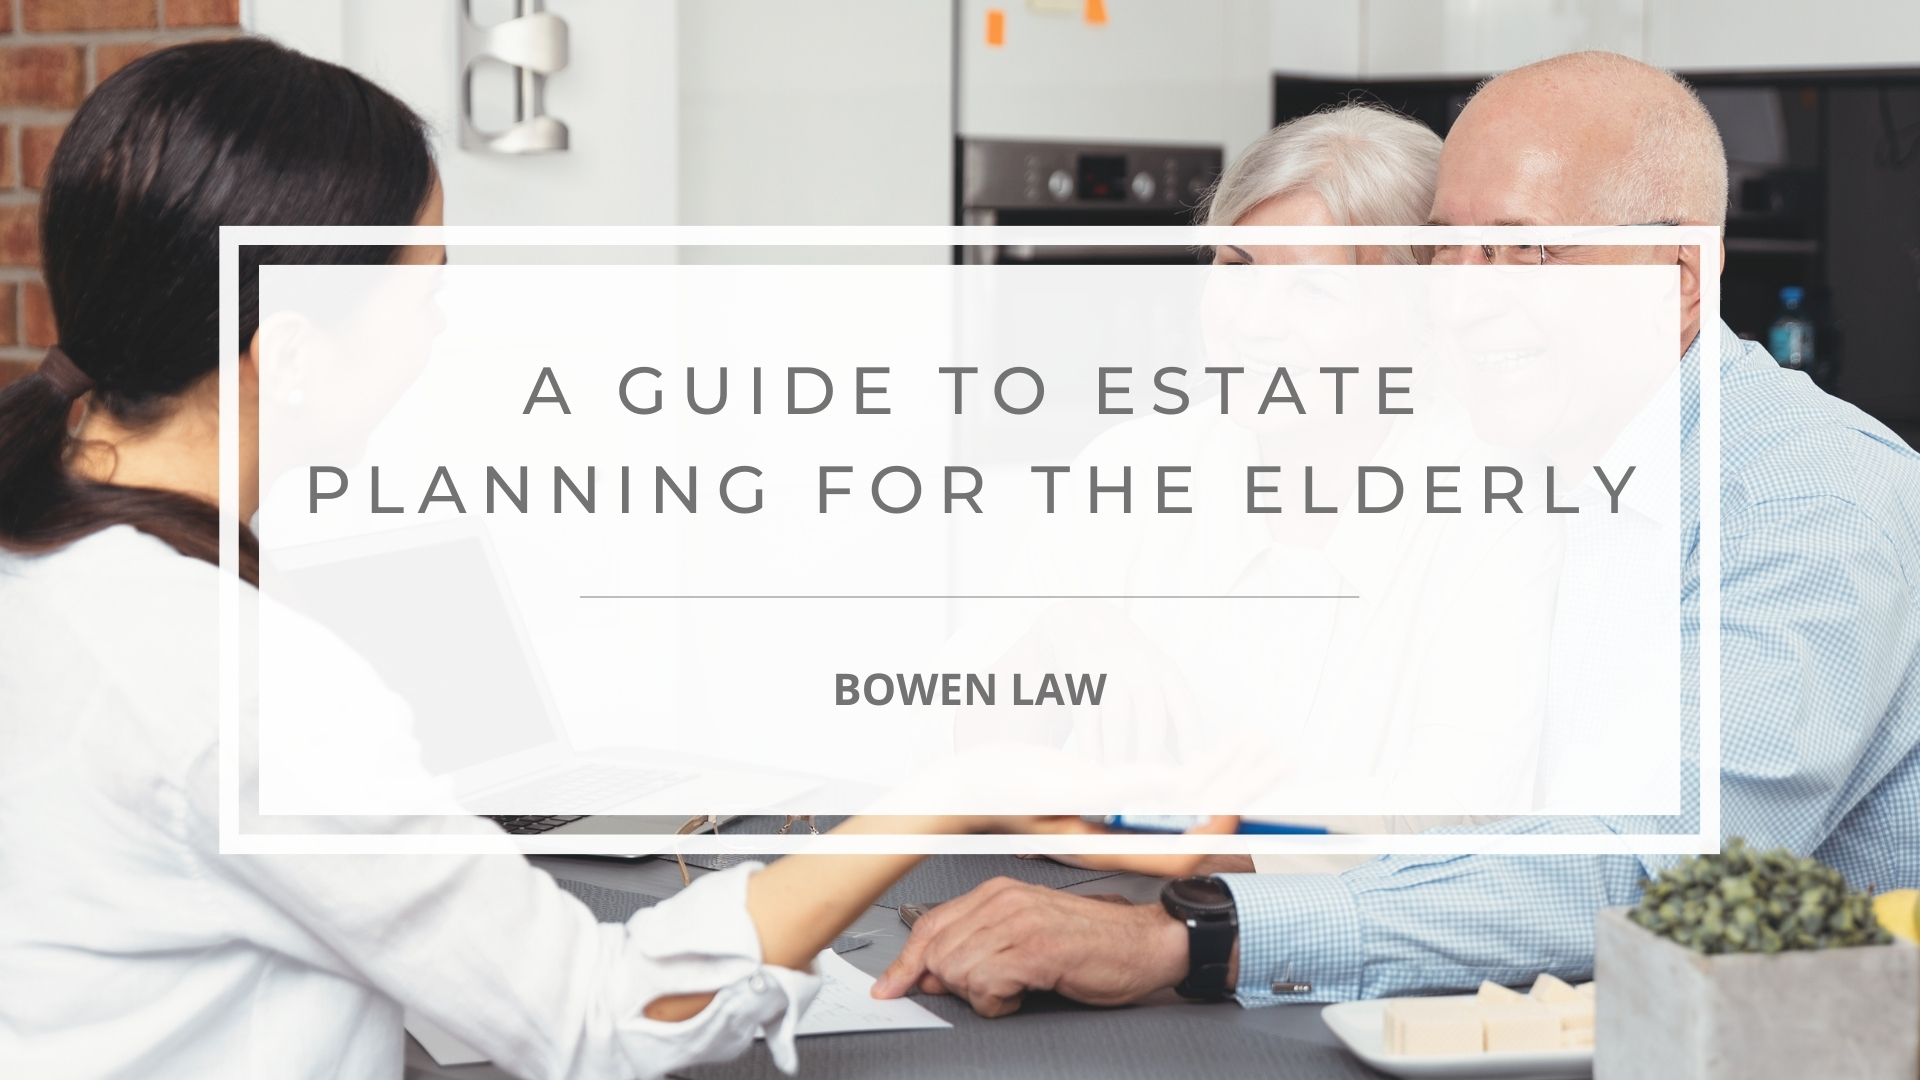 Featured image of a guide to estate planning for the elderly